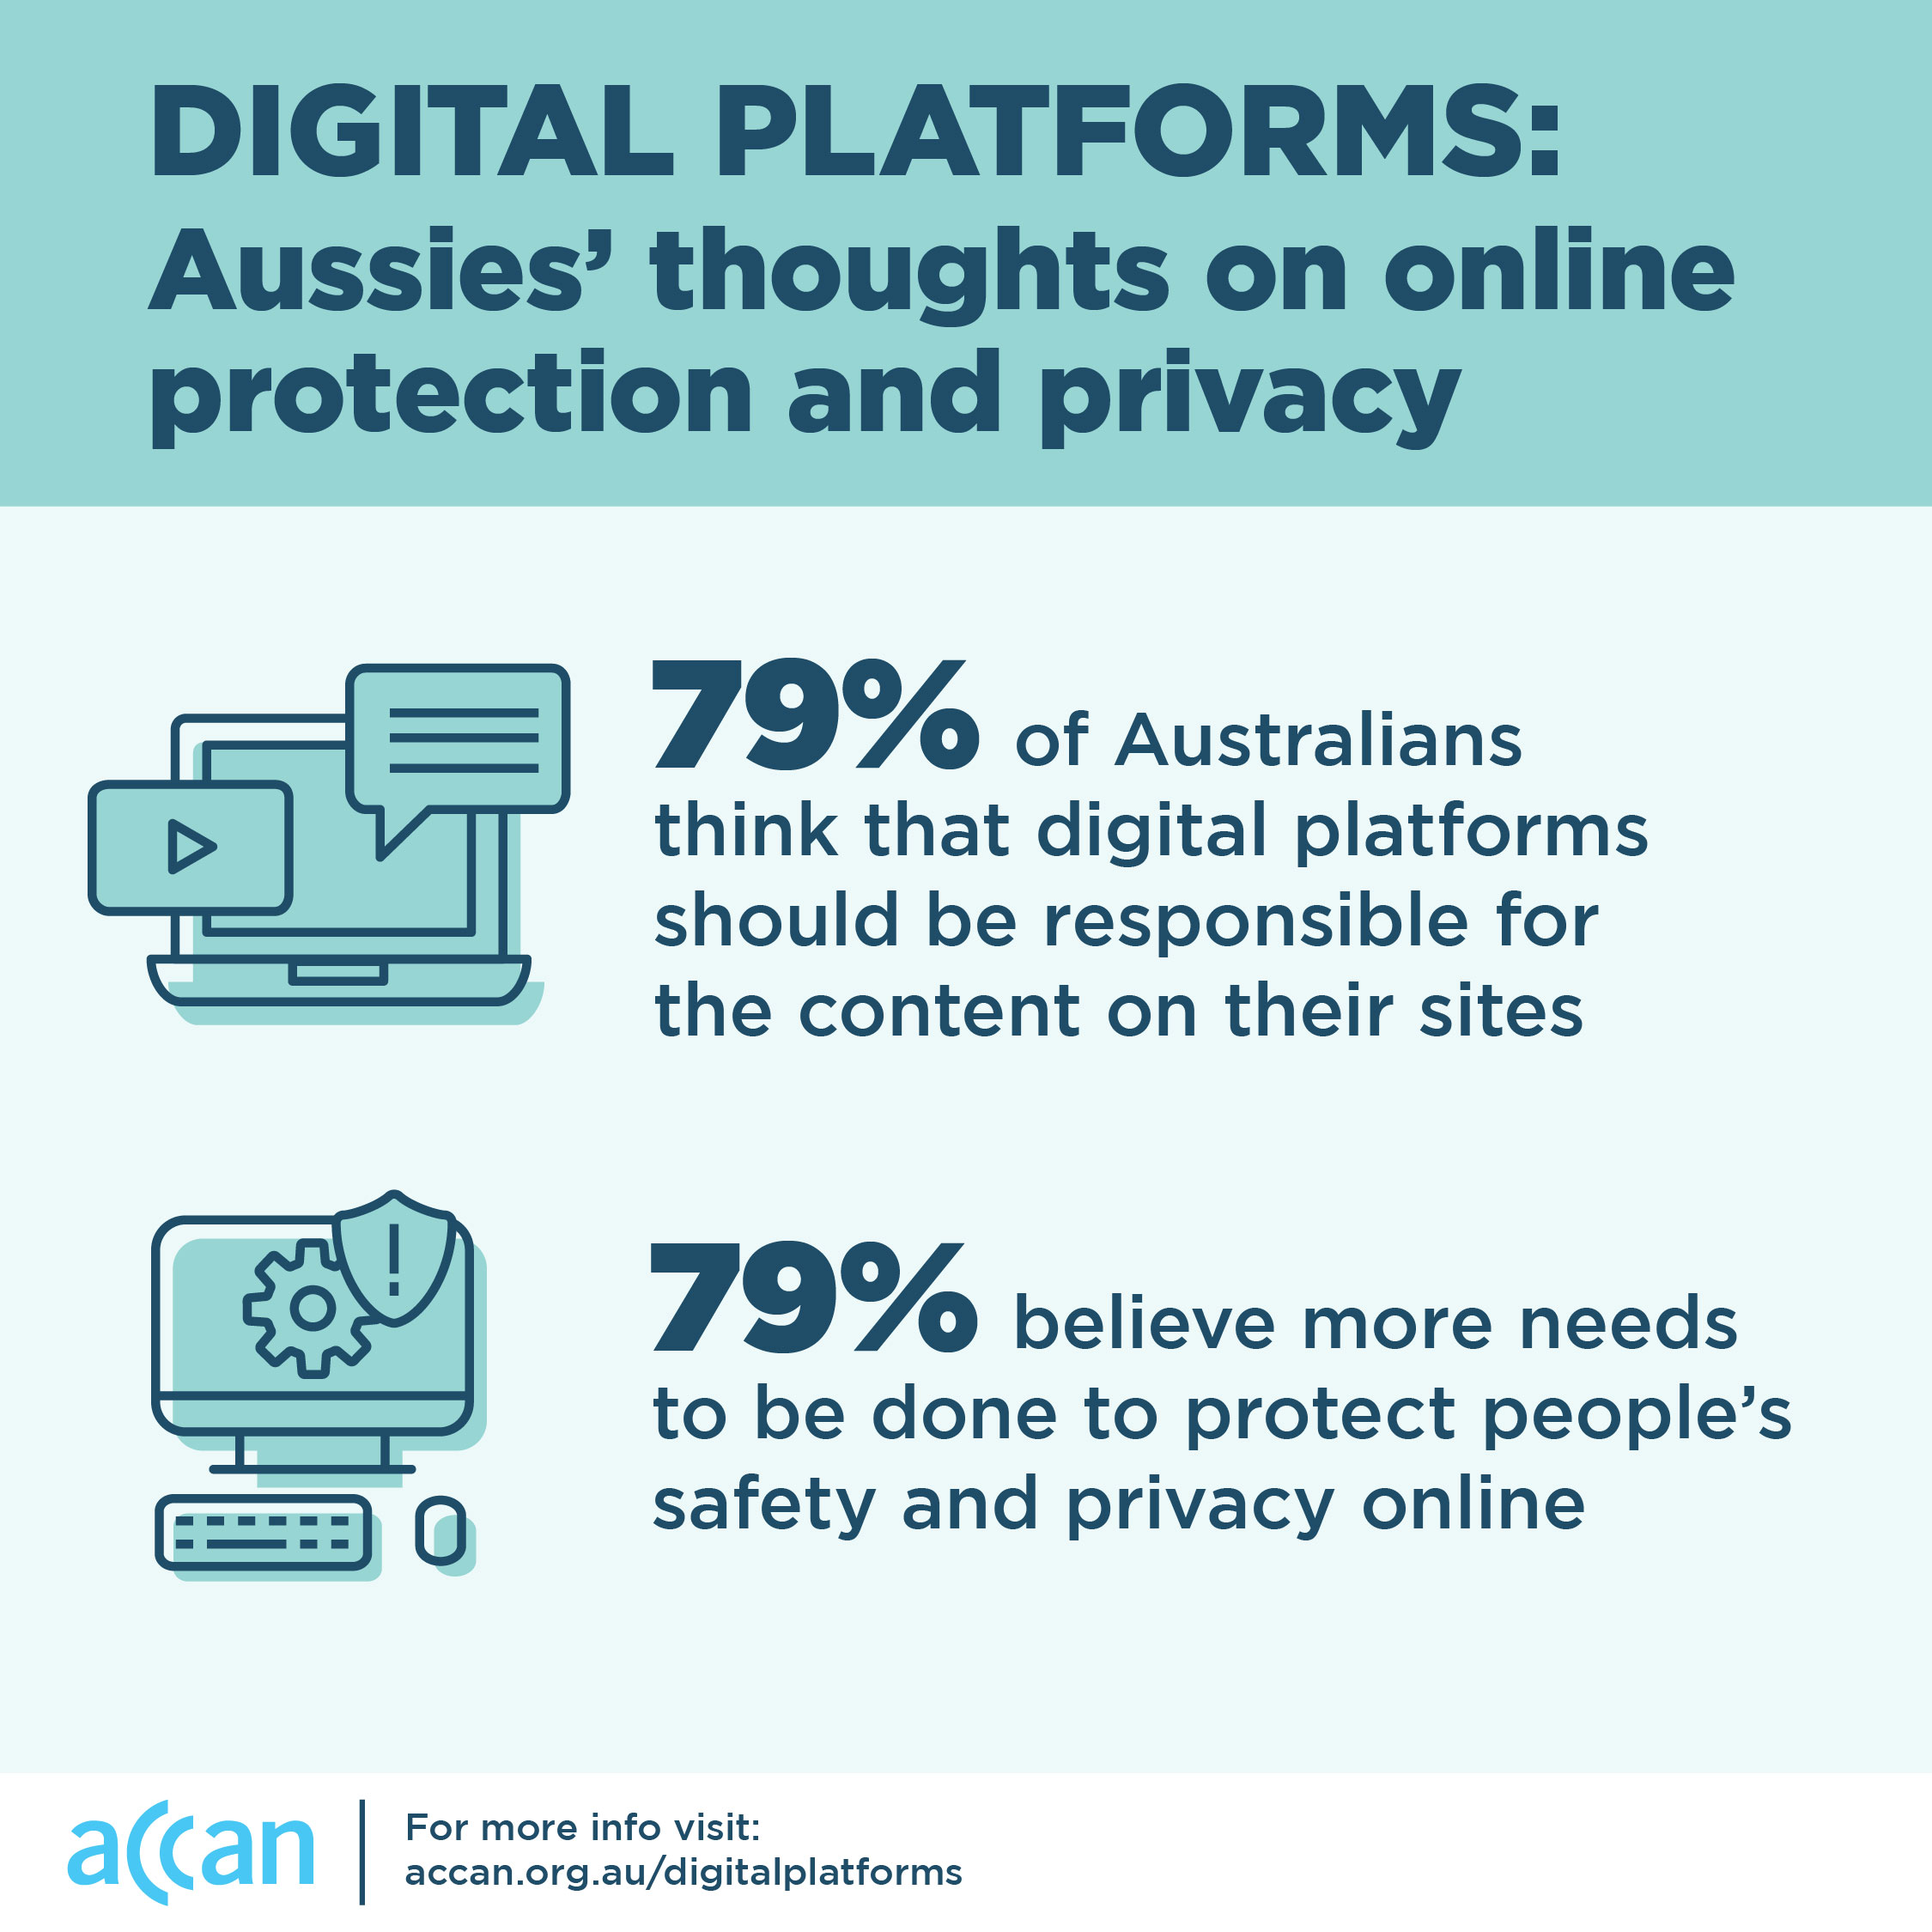 ACCAN Digital Platforms Research. Text reads: digital platforms: Aussies' thoughts on online protection and privacy. 79% of Australians think that digital platforms should be responsible for the content on their sites. 79% believe more needs to be done to proect people's safety and privacy online.